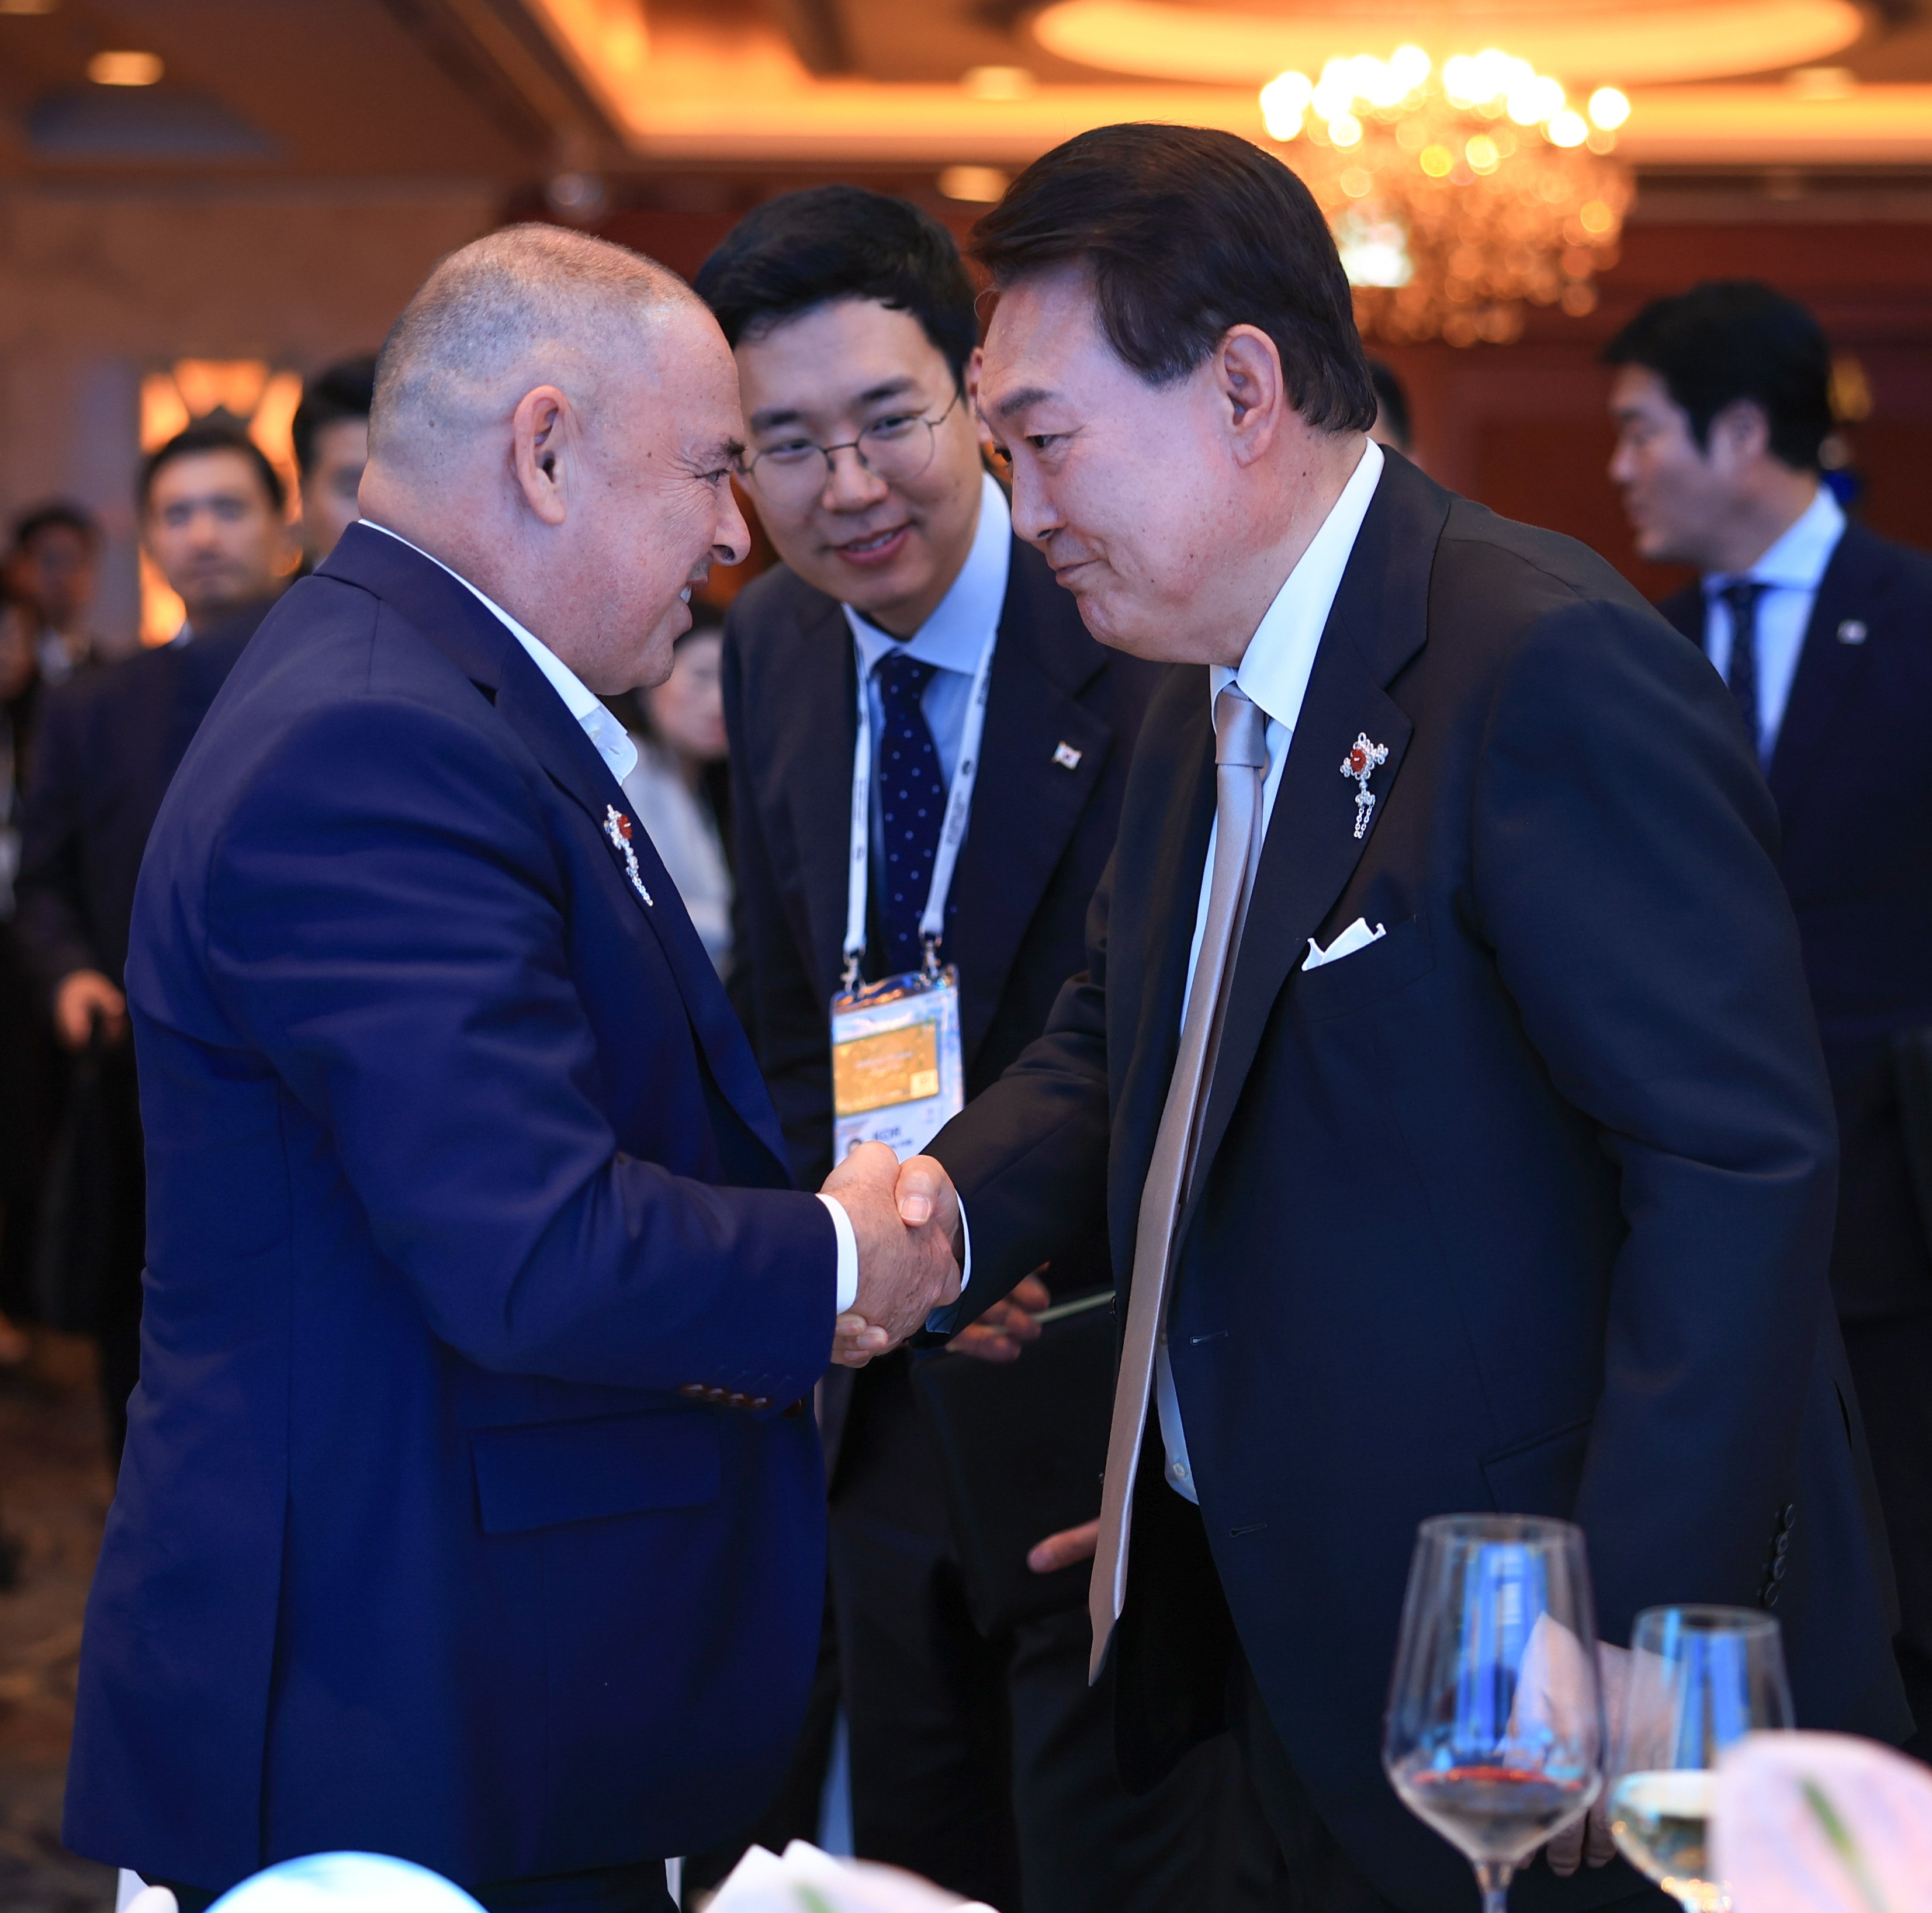 South Korean President Yoon Suk-yeol (right) shakes hands with Cook Islands Prime Minister Mark Brown during a dinner party for the Korea-Pacific Islands Summit at a Seoul hotel last month. Photo: South Korean Presidential Office /EPA-EFE